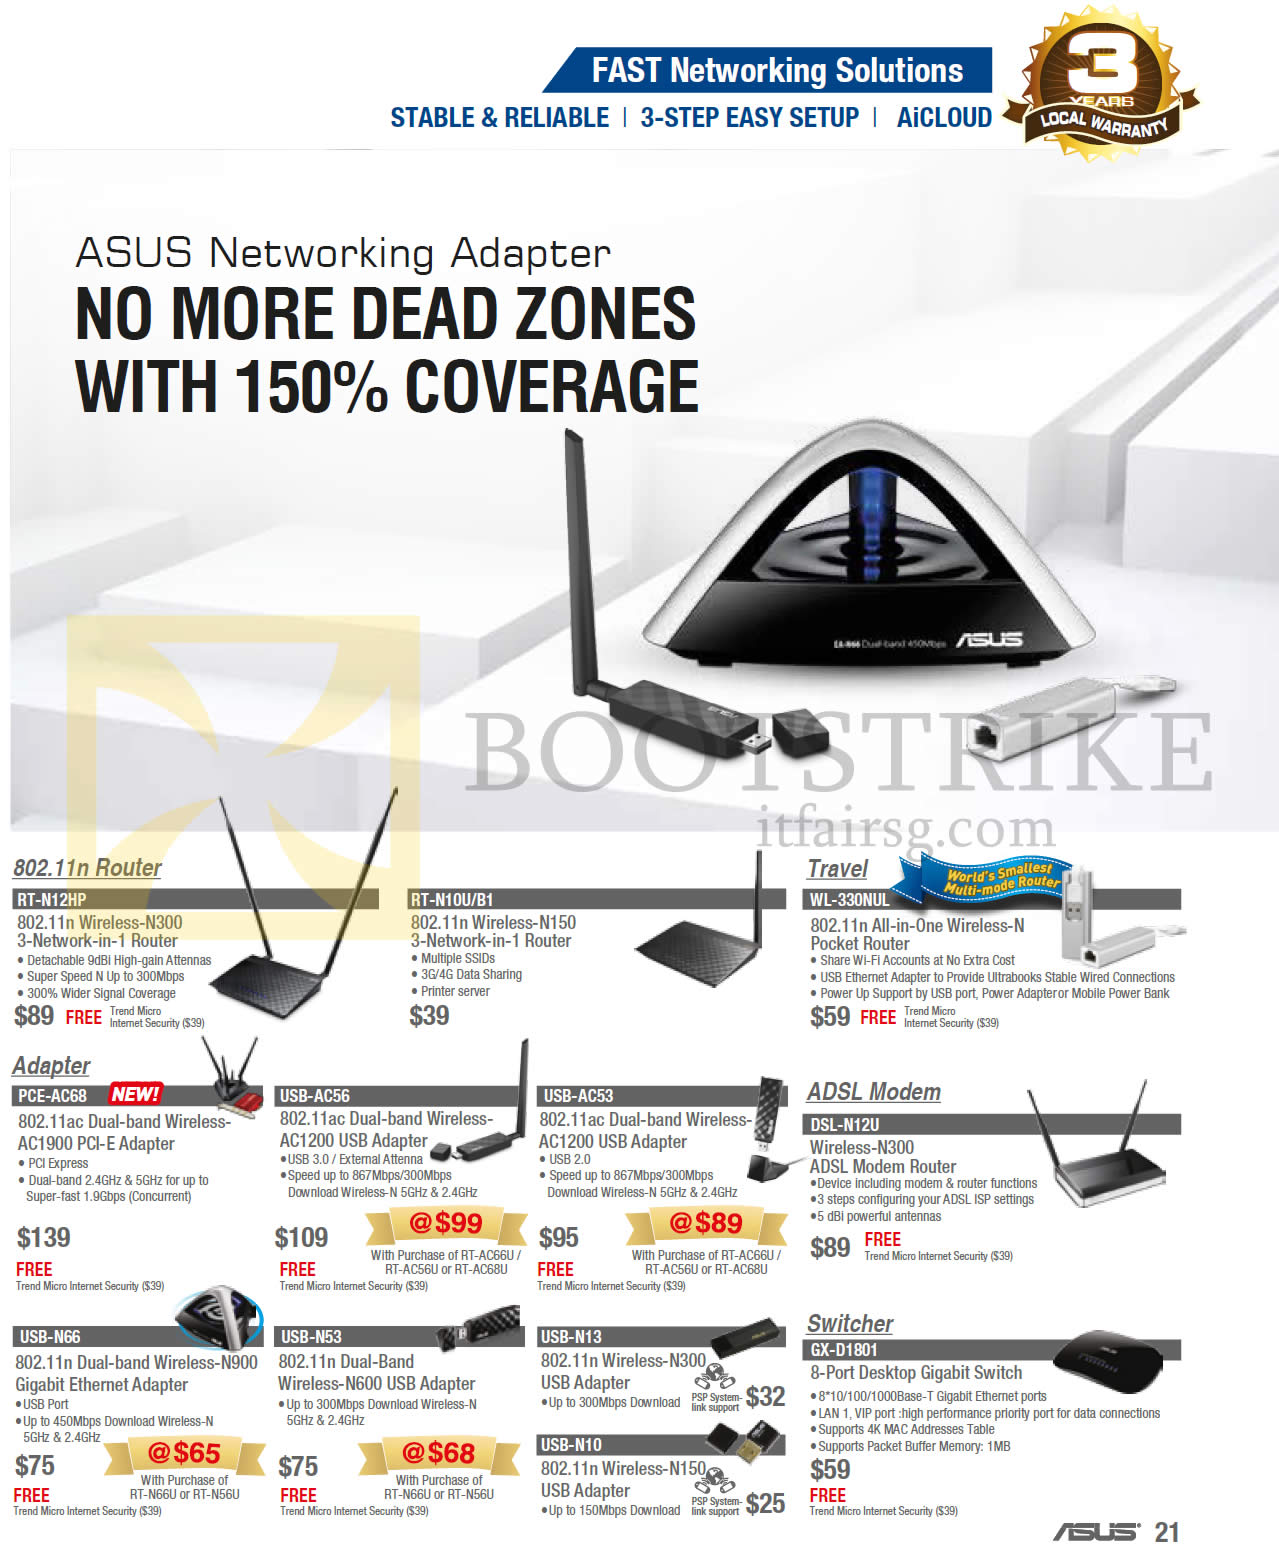 SITEX 2013 price list image brochure of ASUS Networking Routers, Modem, USB Adapters, Switch, RT-N12HP, RT-N10UB1, WL-330NUL, PCE-Ac68, USB-AC56, USB-N66, USB-N53, DSL-N12U, WL330NUL, GX-D1801